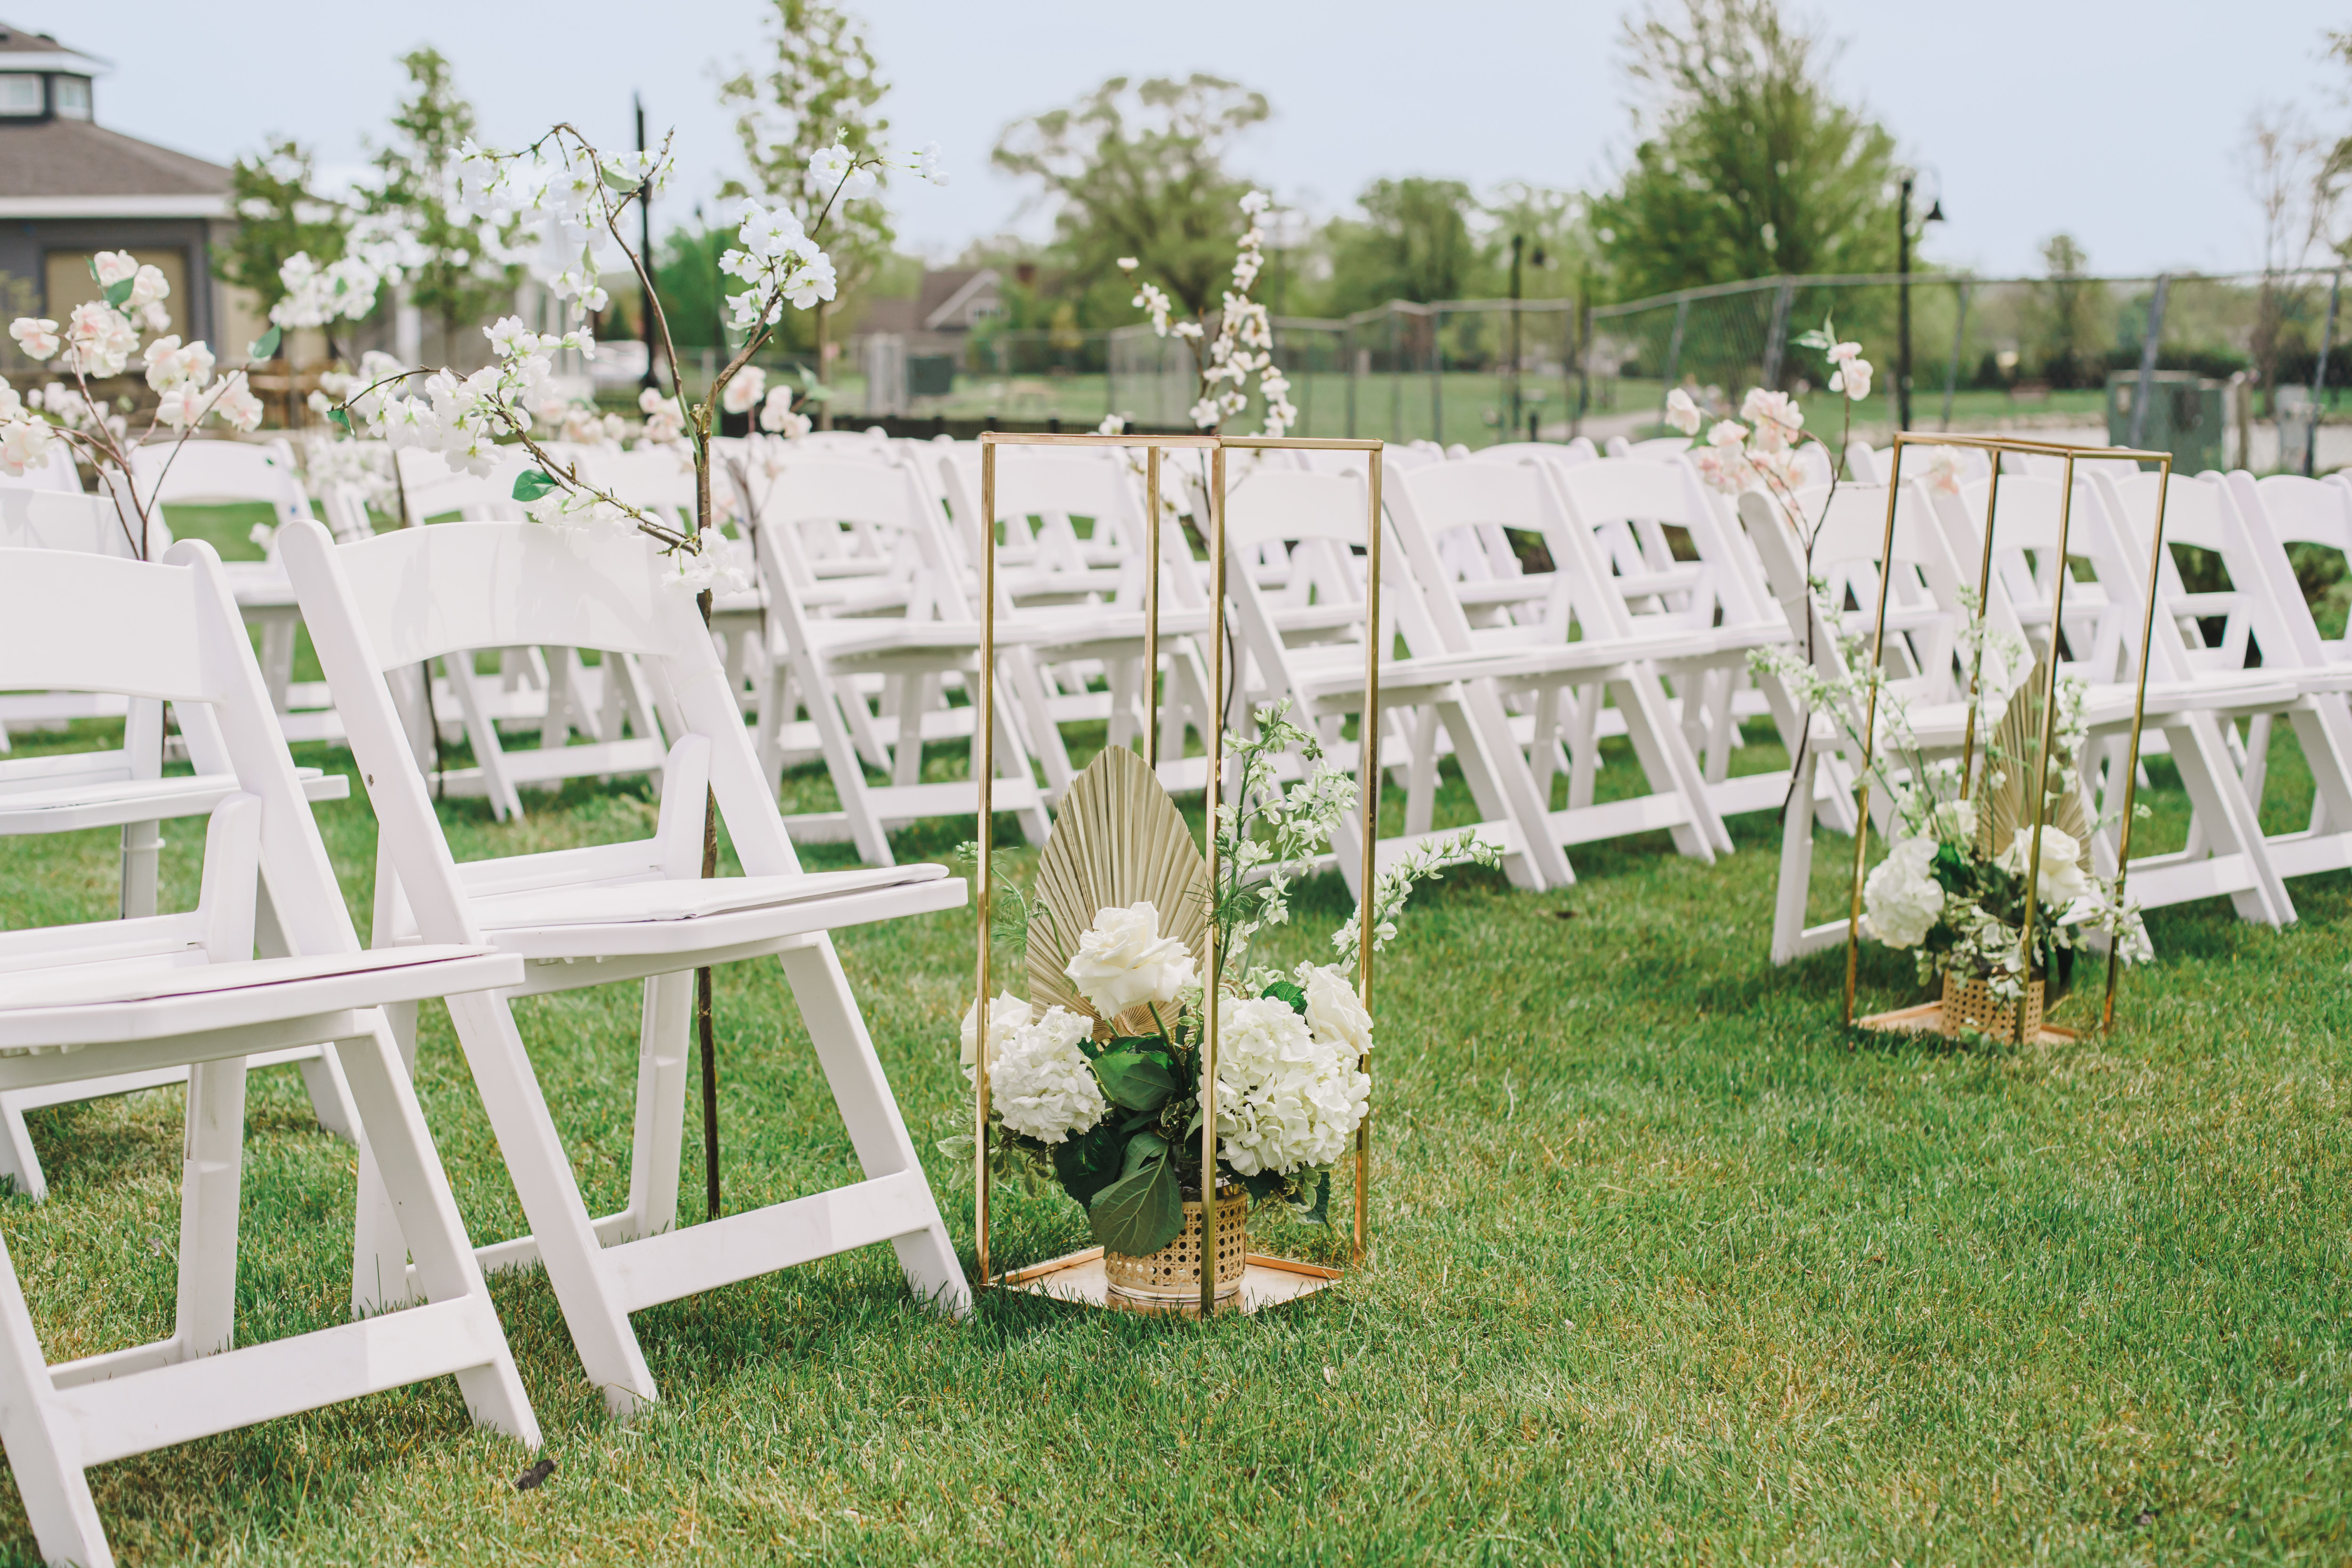 Outdoor wedding setup with chairs